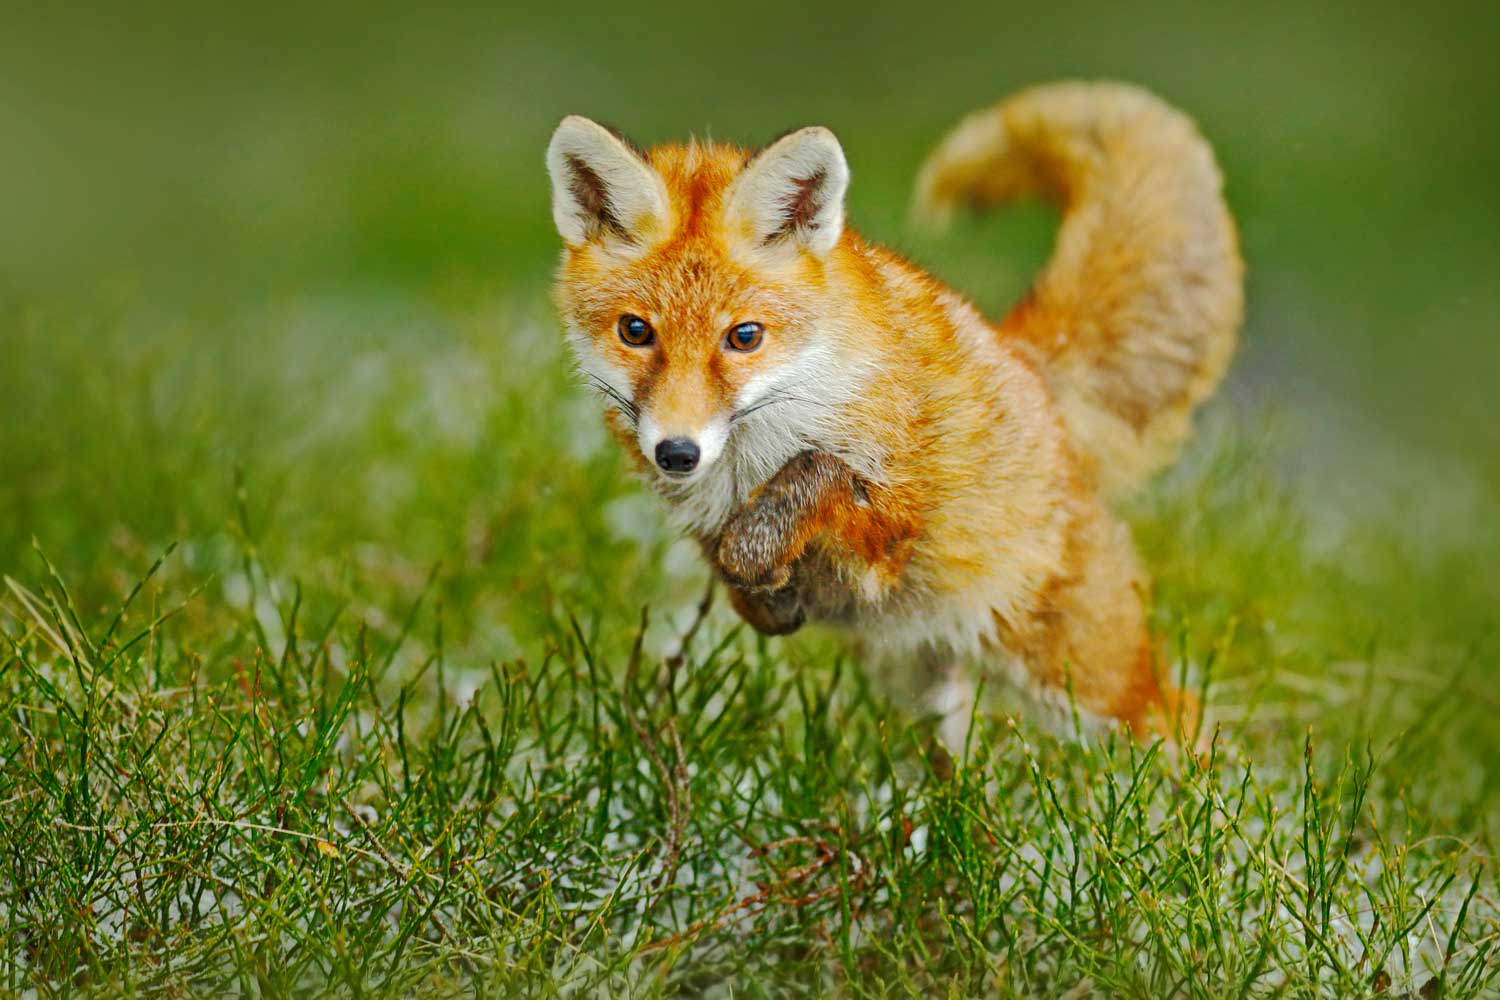 Red fox jumping in grass.